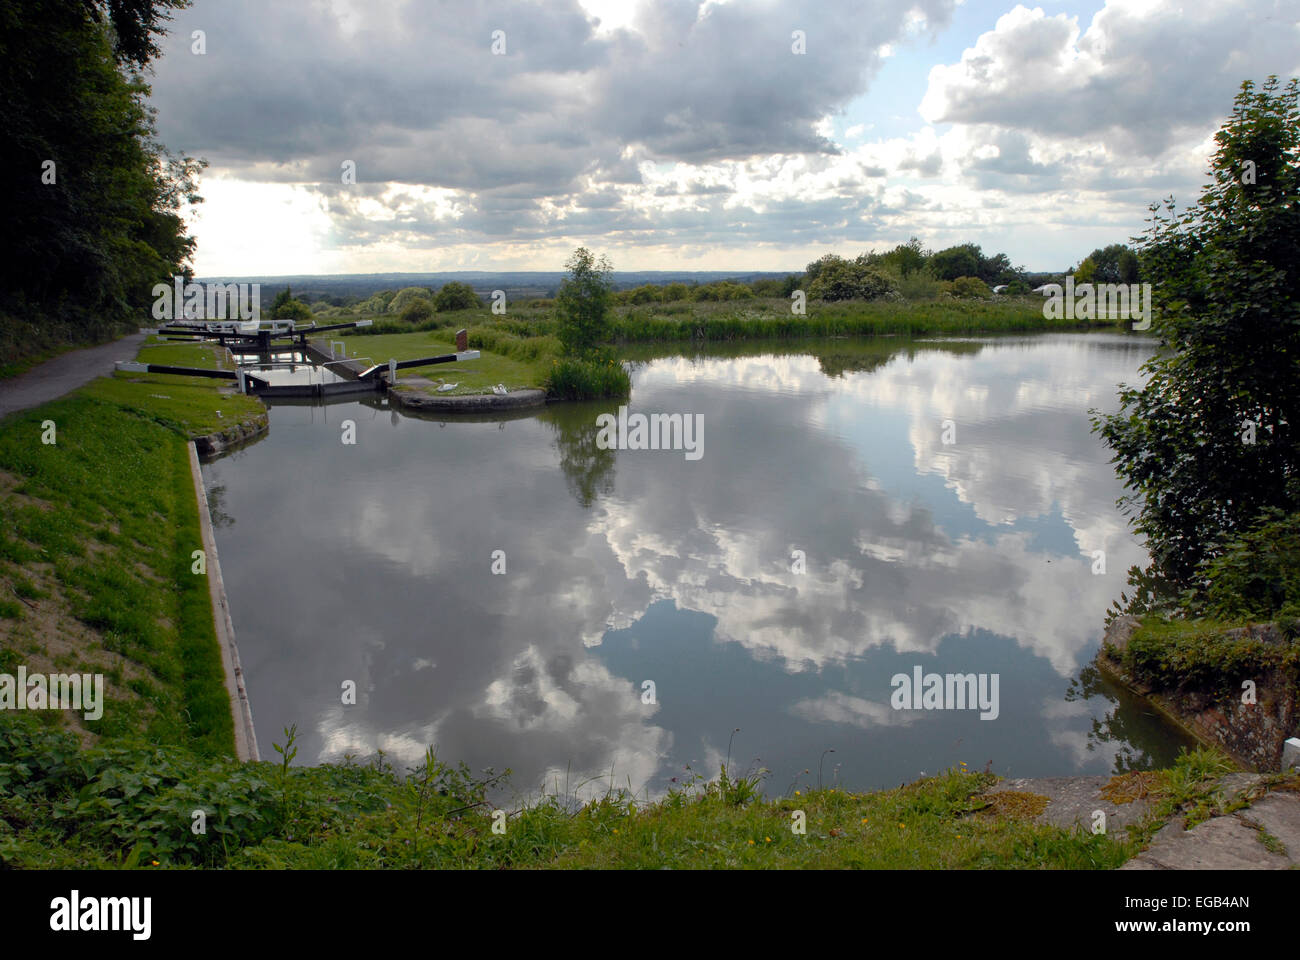 A side pond on the Kennet and Avon canal near Devizes Wiltshire England Stock Photo